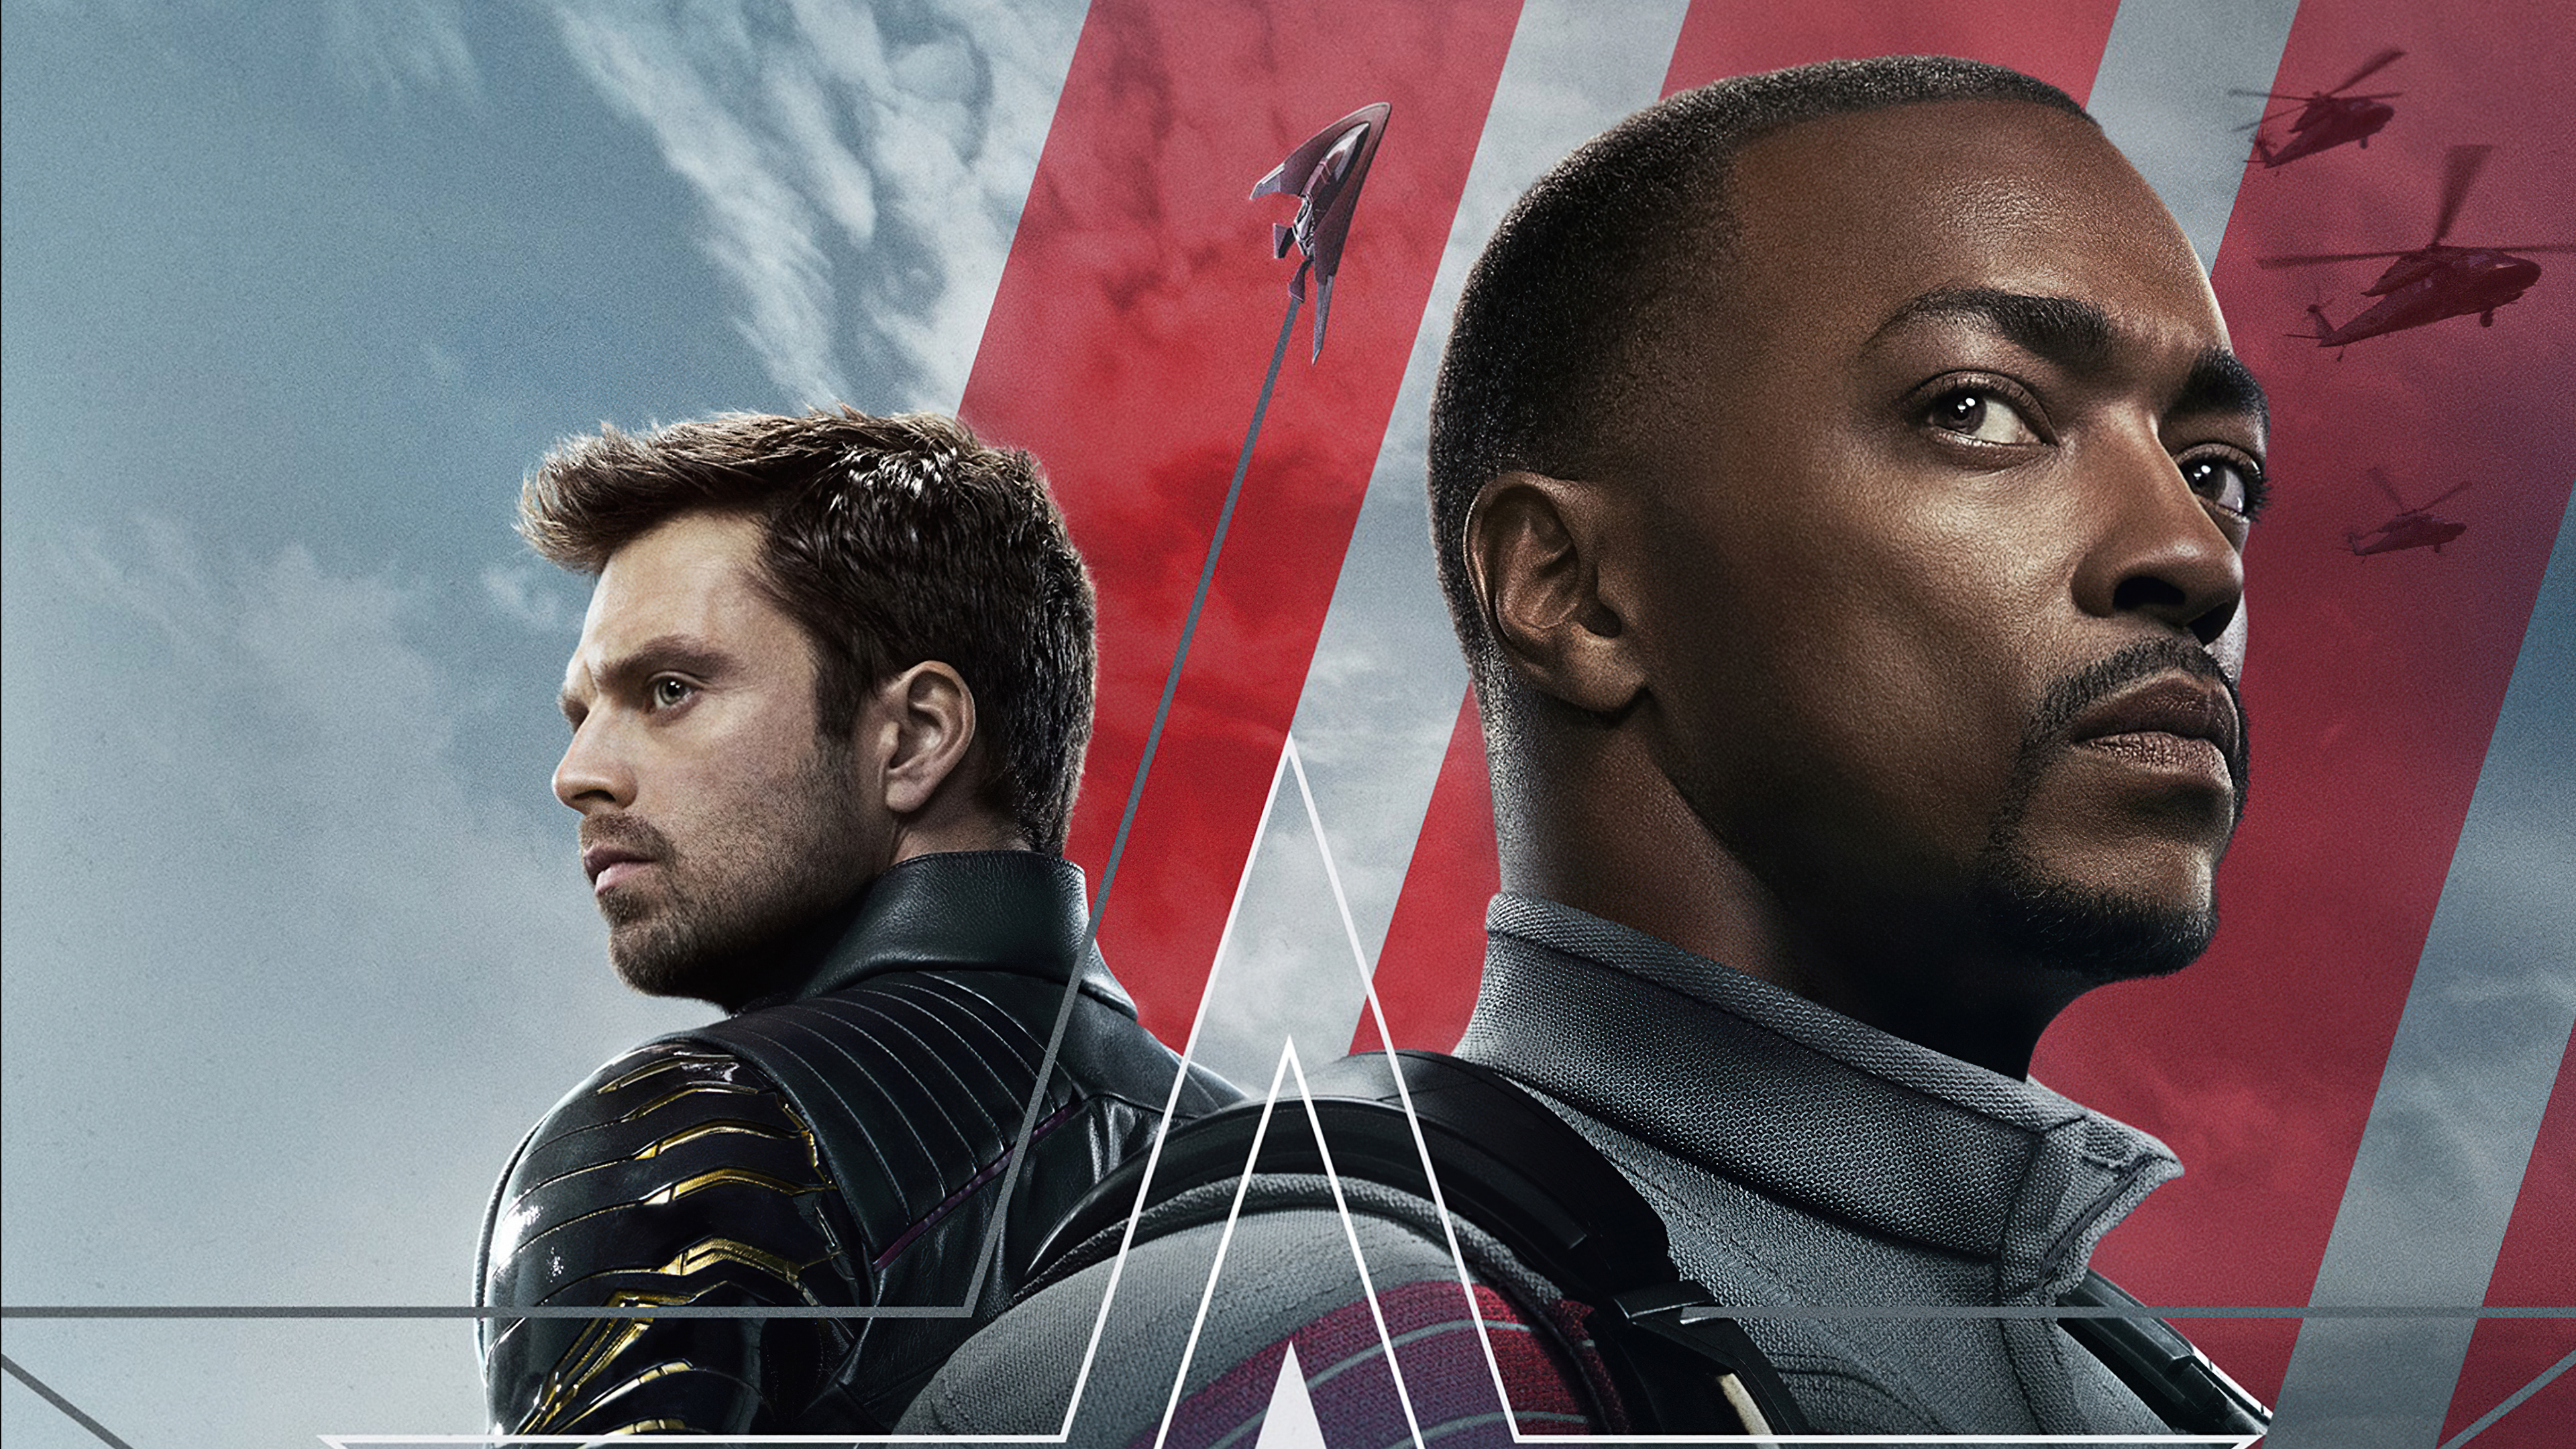 tv show, the falcon and the winter soldier, anthony mackie, bucky barnes, falcon (marvel comics), sam wilson, sebastian stan, winter soldier